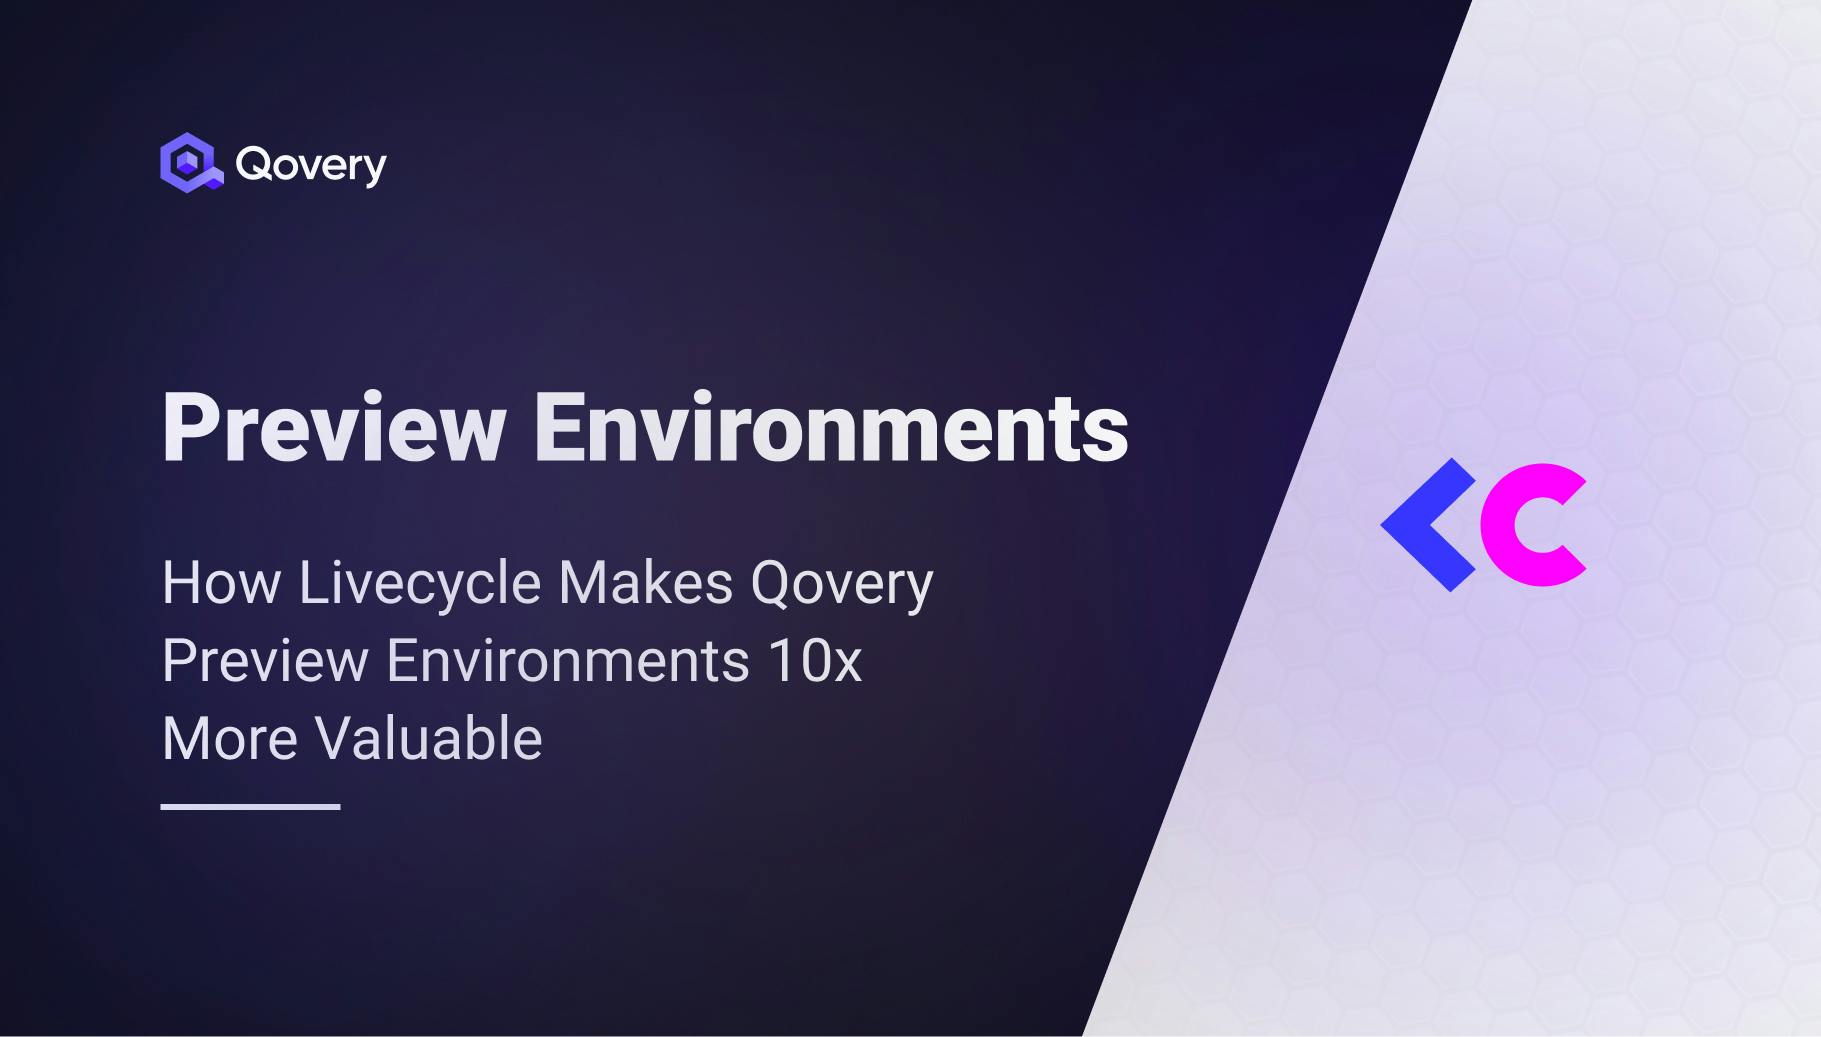 How Livecycle Makes Qovery Preview Environments 10x More Valuable - Qovery